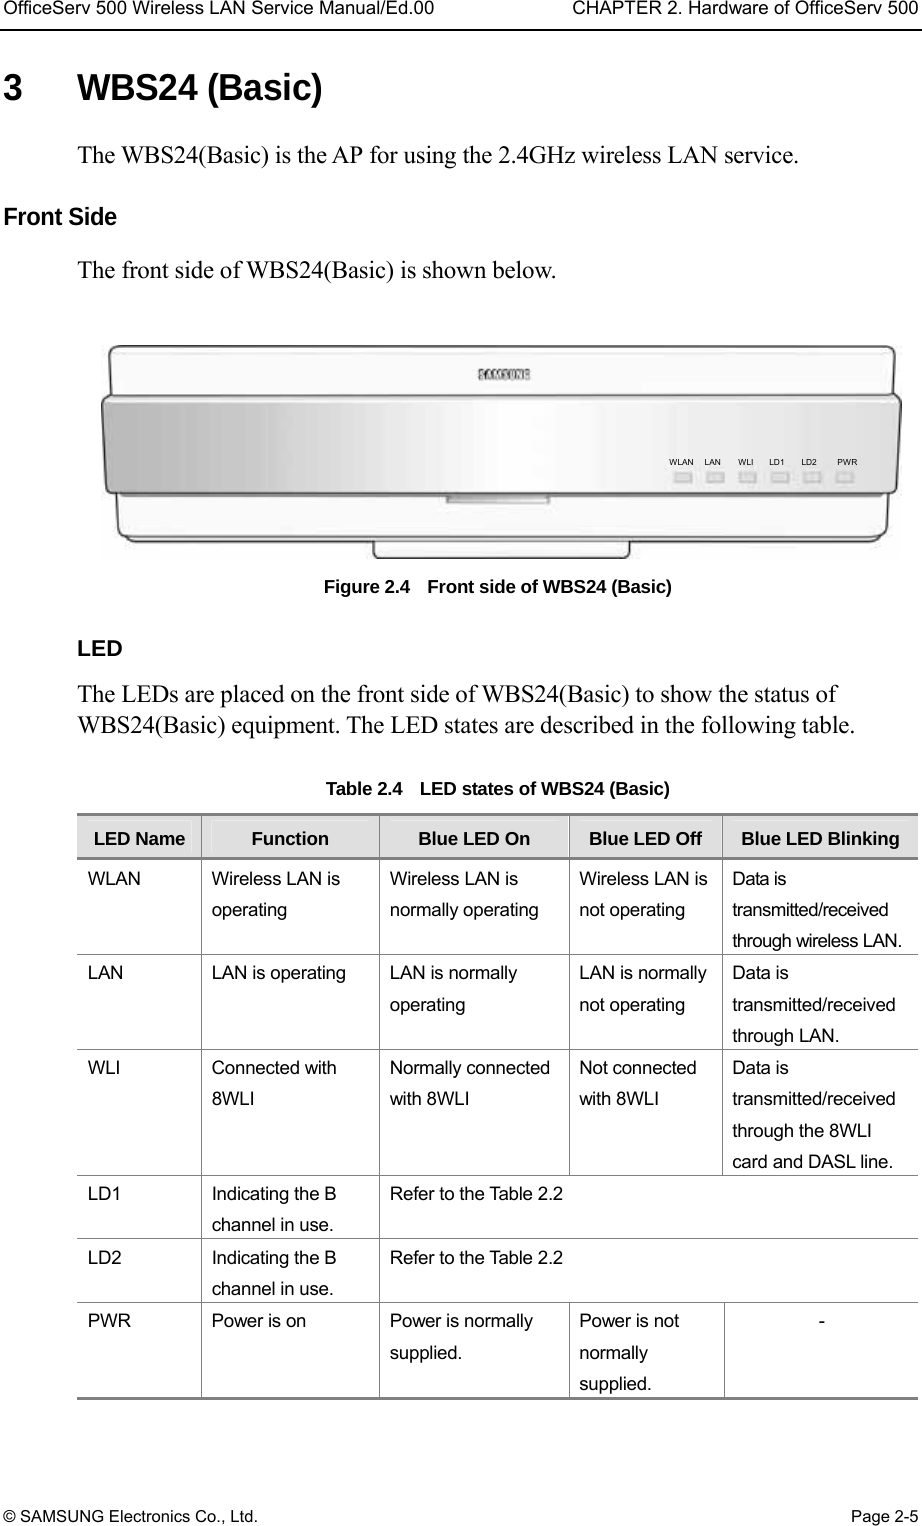 OfficeServ 500 Wireless LAN Service Manual/Ed.00  CHAPTER 2. Hardware of OfficeServ 500 © SAMSUNG Electronics Co., Ltd.  Page 2-5 3 WBS24 (Basic) The WBS24(Basic) is the AP for using the 2.4GHz wireless LAN service.    Front Side   The front side of WBS24(Basic) is shown below.  Figure 2.4    Front side of WBS24 (Basic)  LED The LEDs are placed on the front side of WBS24(Basic) to show the status of WBS24(Basic) equipment. The LED states are described in the following table.  Table 2.4    LED states of WBS24 (Basic) LED Name  Function  Blue LED On  Blue LED Off  Blue LED BlinkingWLAN  Wireless LAN is operating Wireless LAN is normally operating Wireless LAN is not operating Data is transmitted/received through wireless LAN. LAN  LAN is operating  LAN is normally operating LAN is normally not operating Data is transmitted/received through LAN. WLI Connected with 8WLI Normally connected with 8WLI Not connected with 8WLI Data is transmitted/received through the 8WLI card and DASL line. LD1  Indicating the B channel in use. Refer to the Table 2.2   LD2  Indicating the B channel in use. Refer to the Table 2.2   PWR  Power is on  Power is normally supplied. Power is not normally supplied. -  WLAN LAN WLI LD1 LD2  PWR